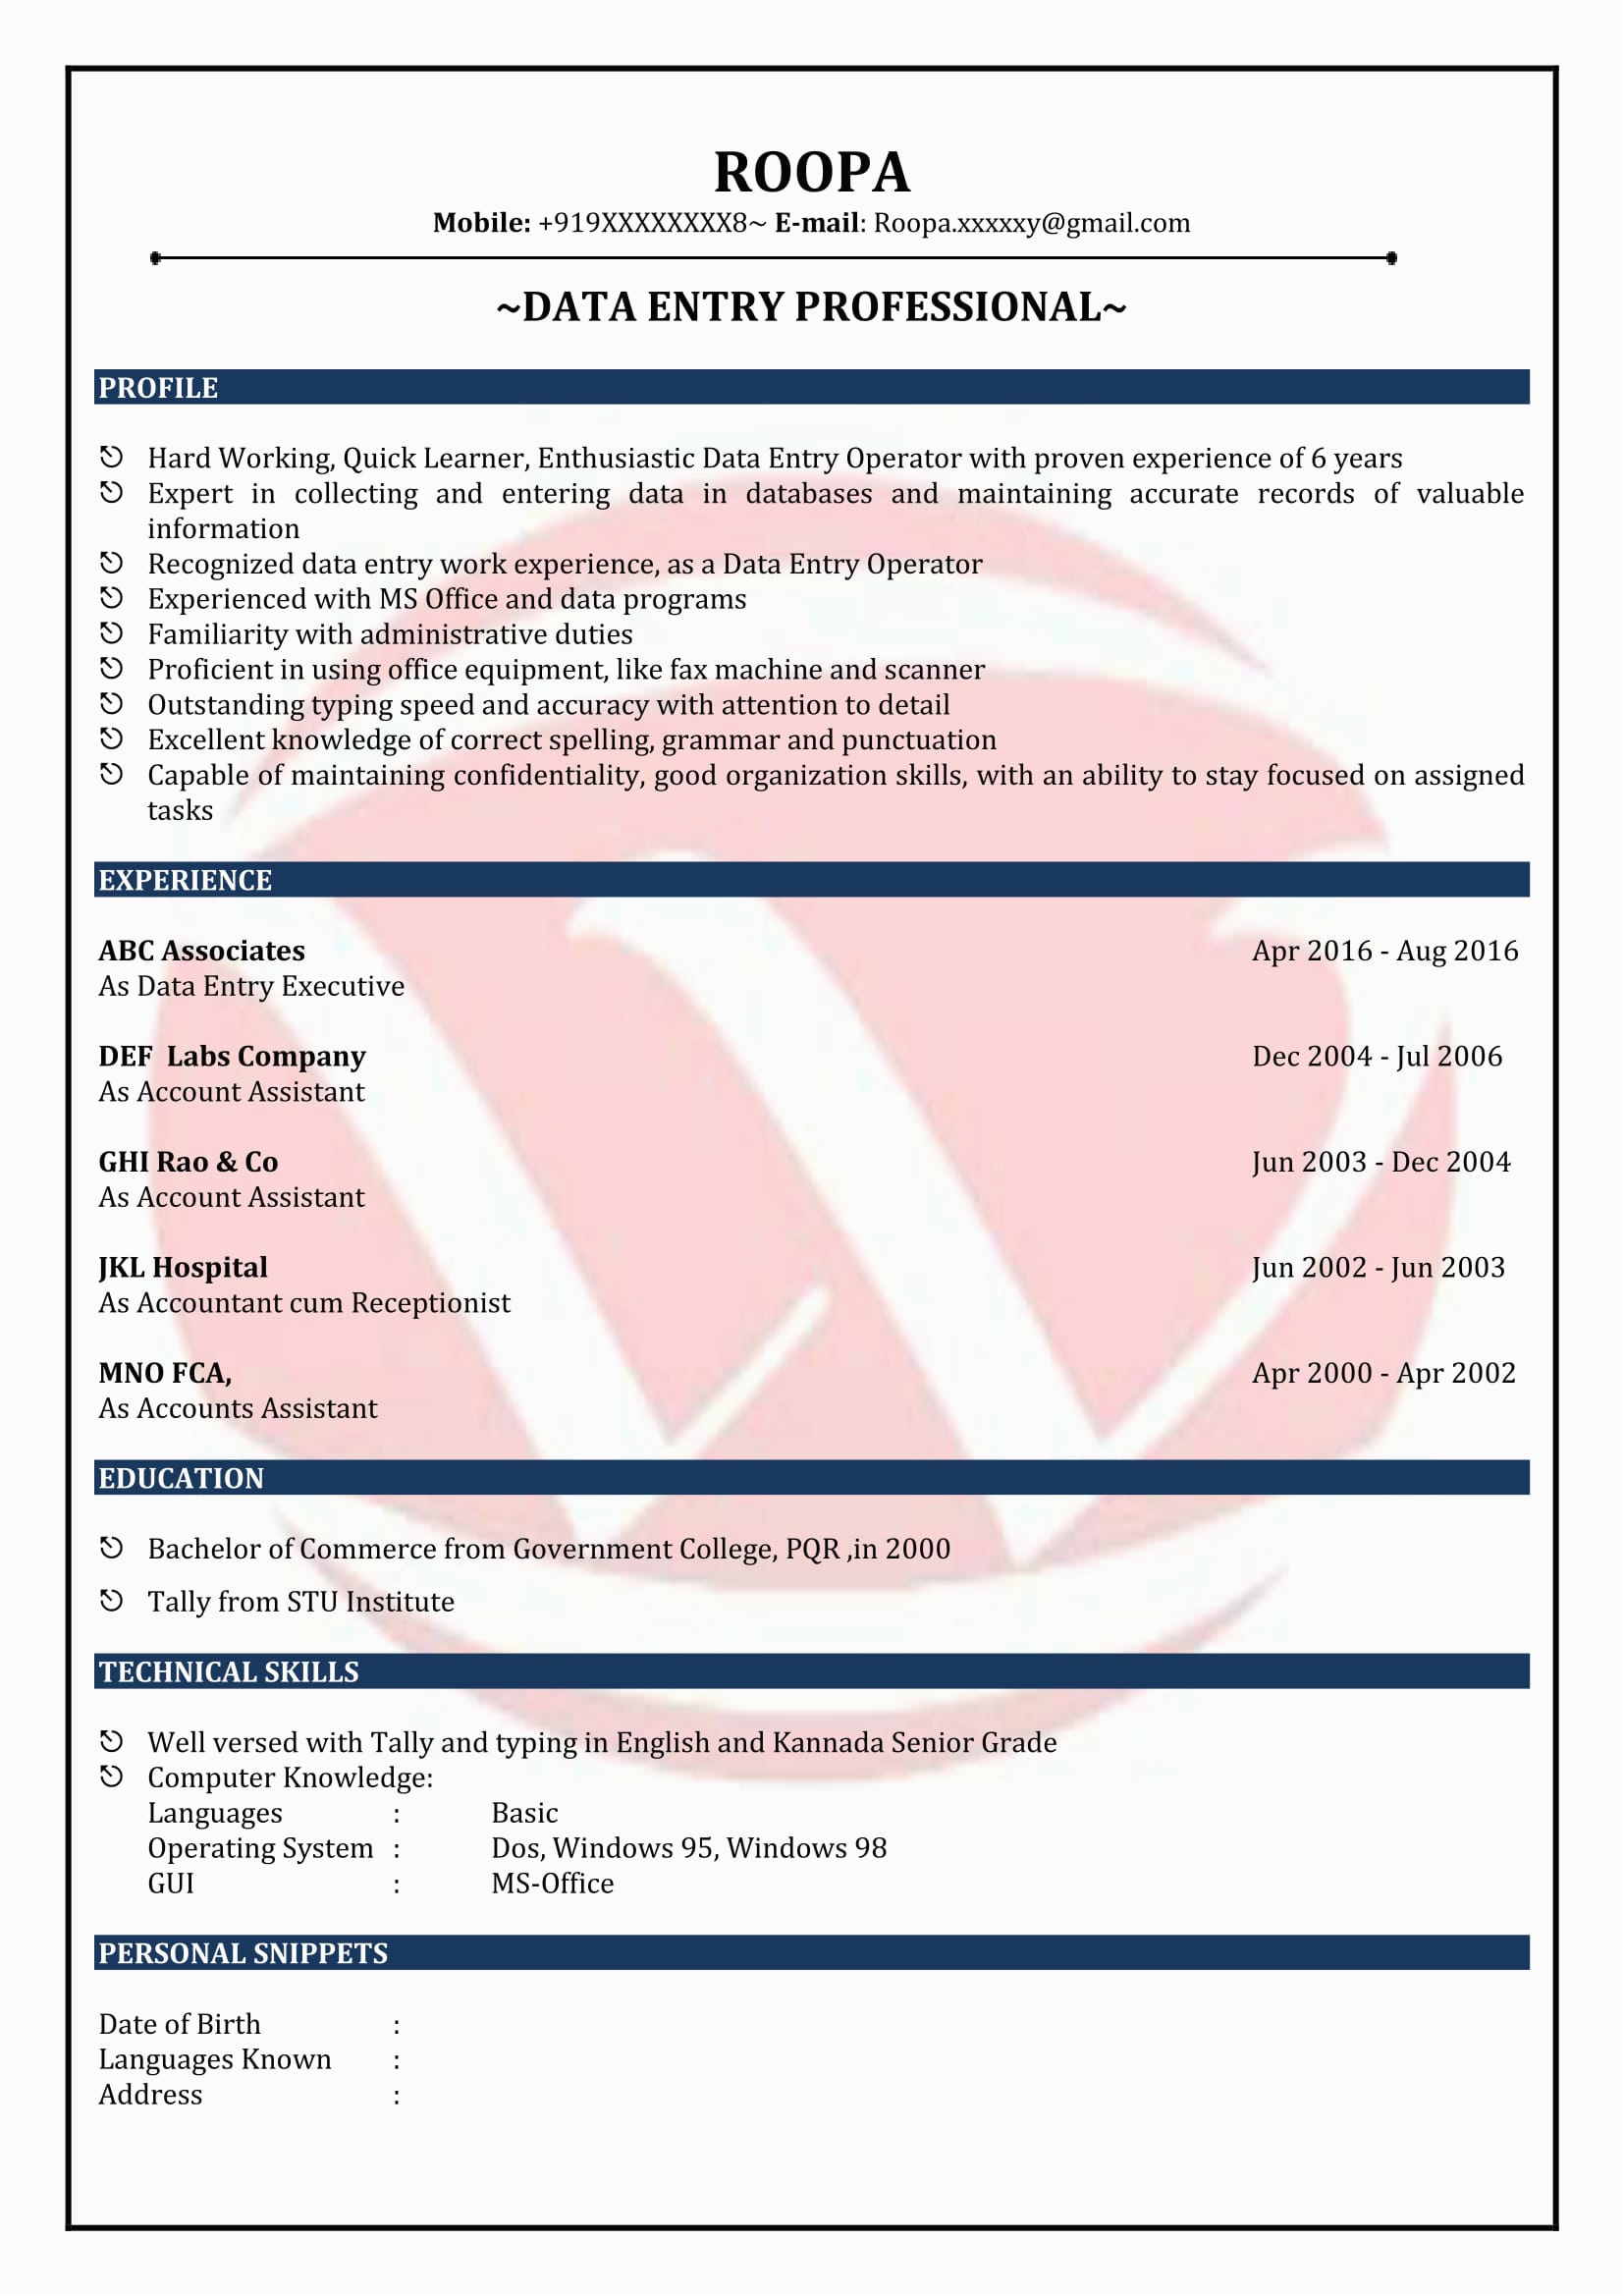 Free Sample Resume for Data Entry Data Entry Sample Resumes Download Resume format Templates